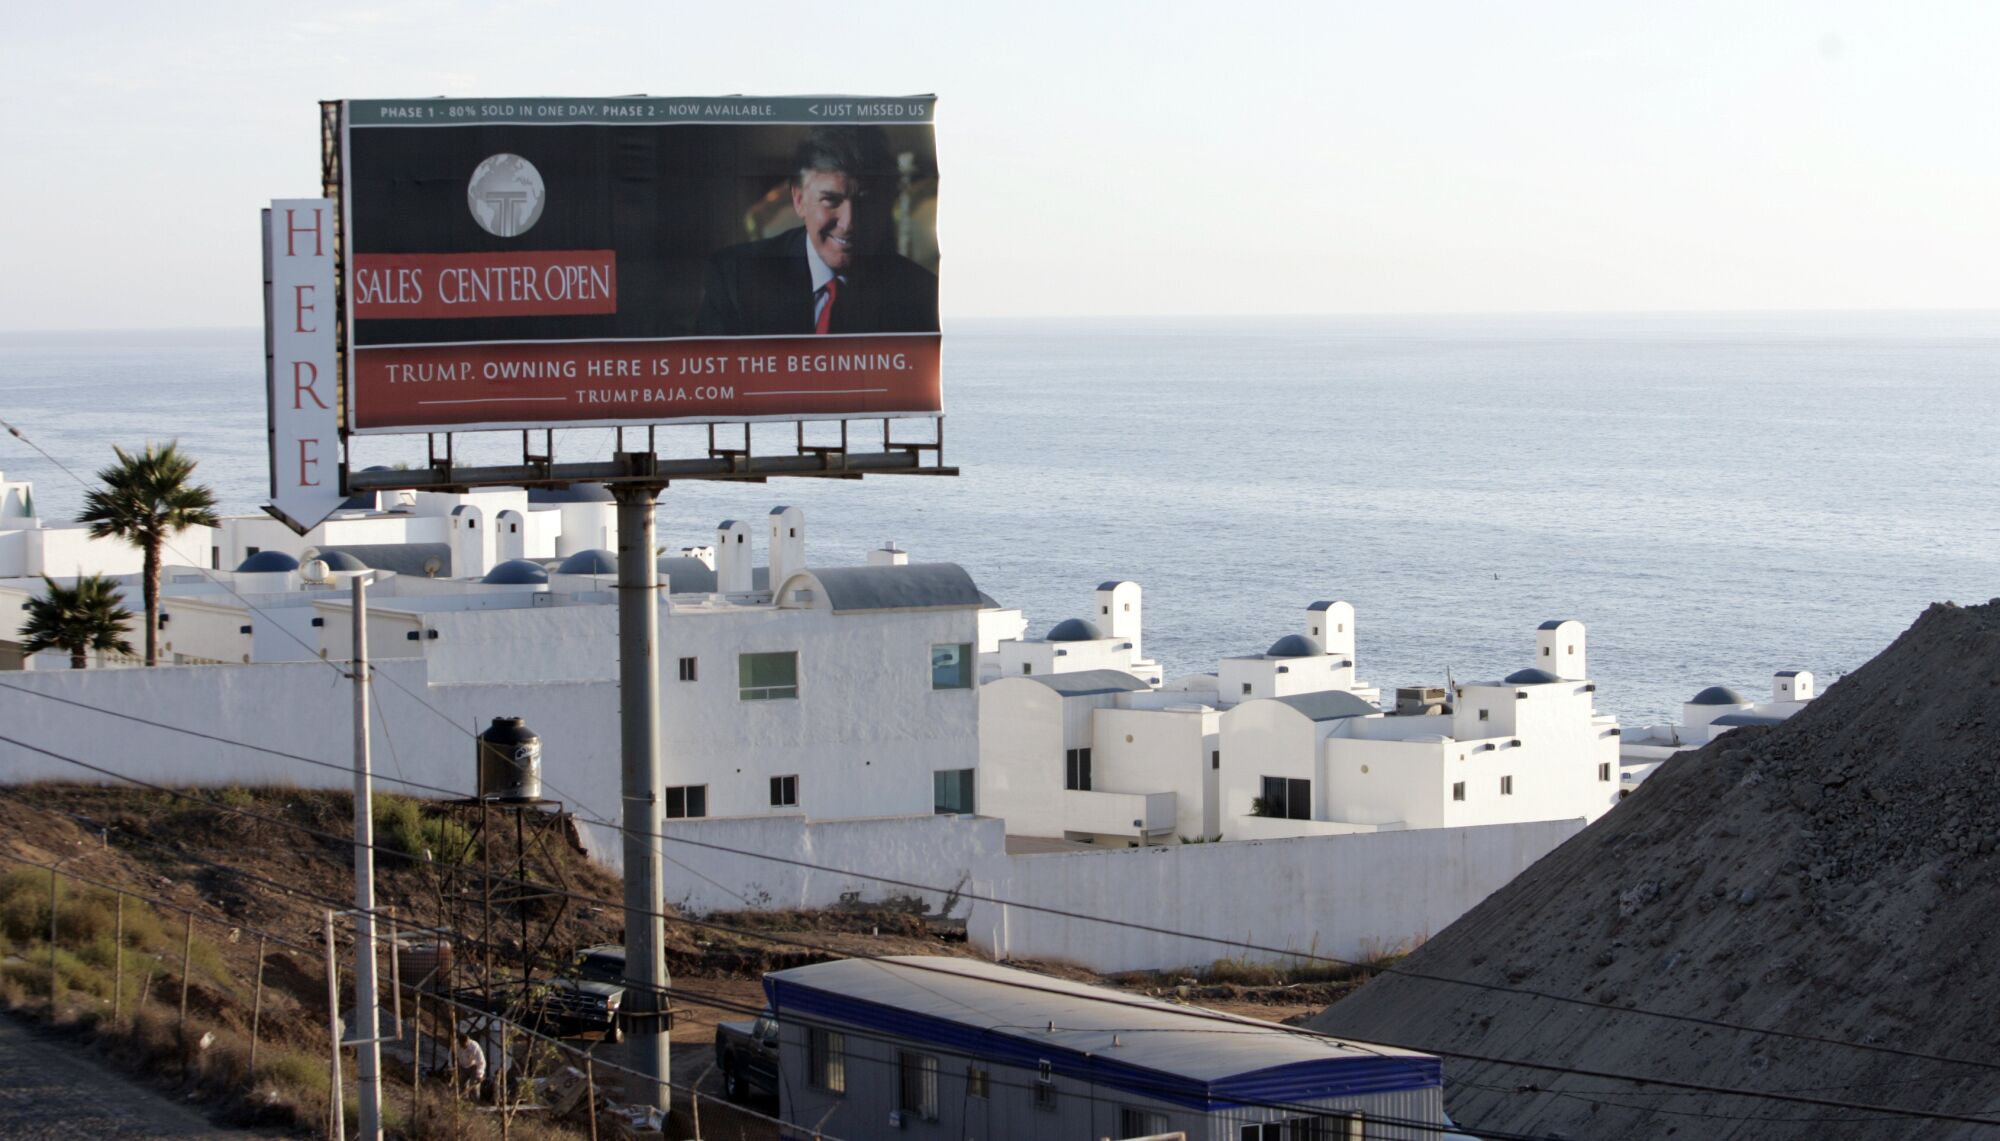 A Trump resort billboard is shown against stretch of Pacific coast between Tijuana's Playas area and Rosarito.